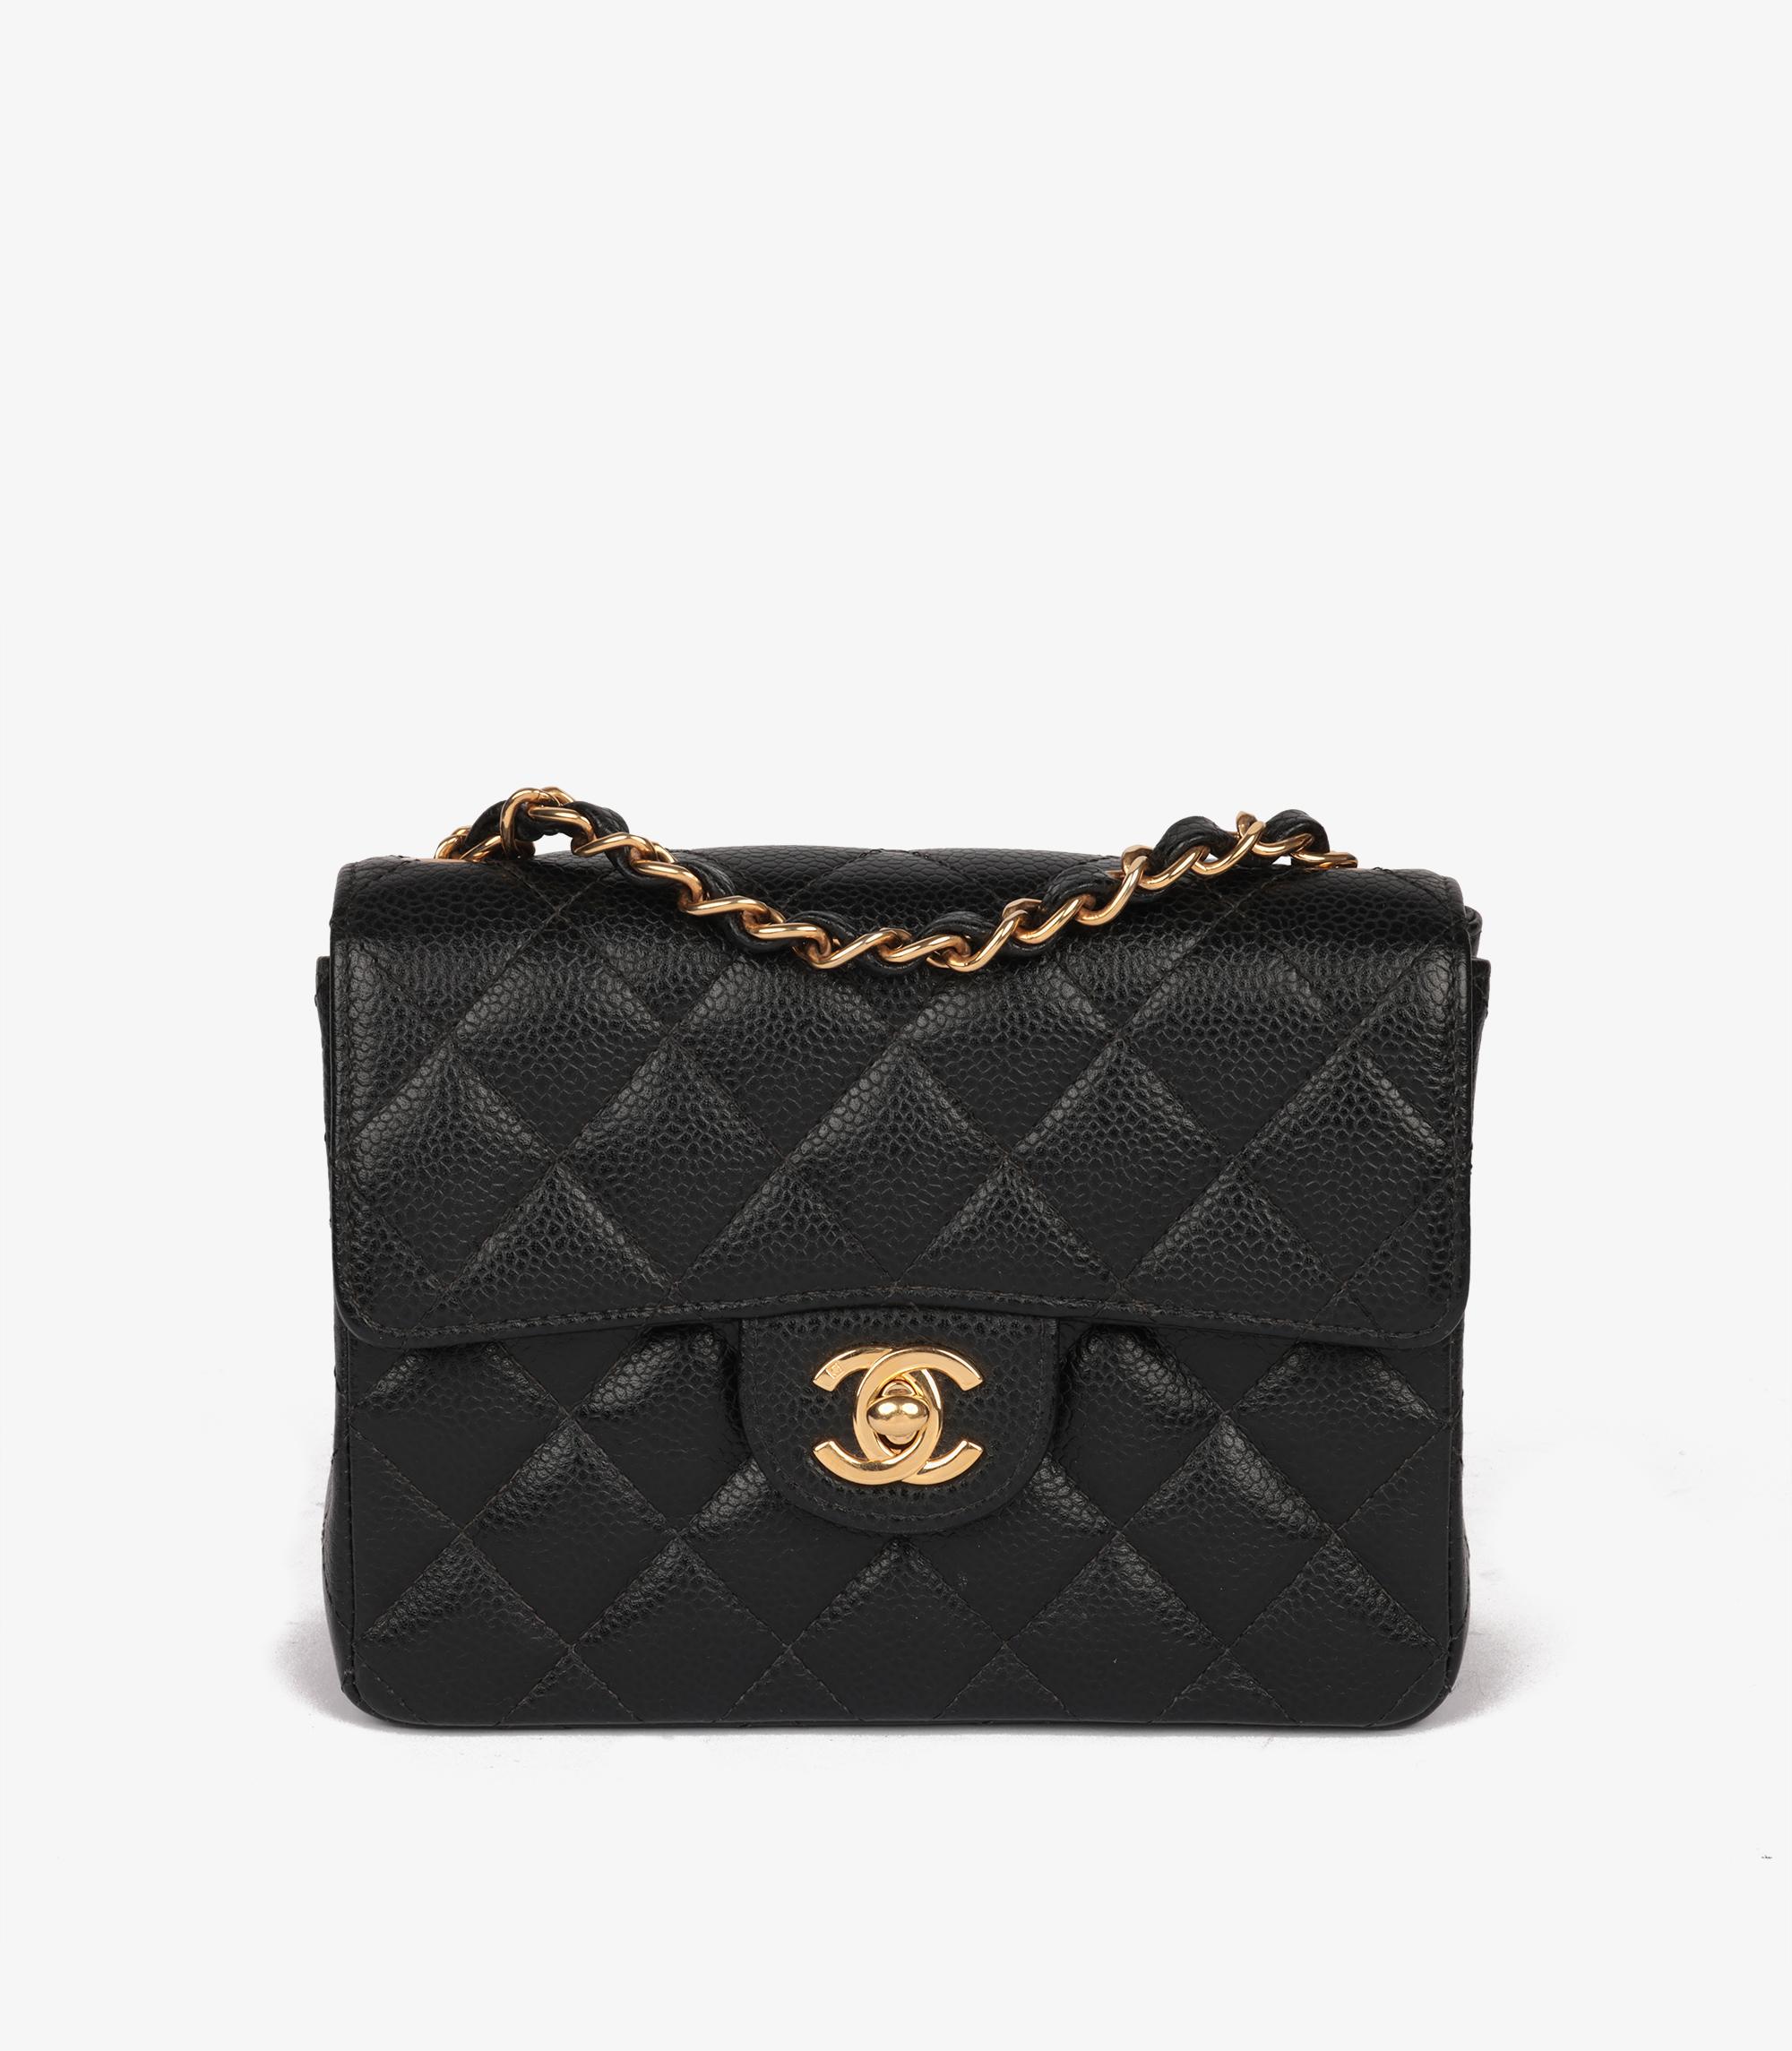 Chanel Black Quilted Caviar Leather Vintage Square Mini Flap Bag

Brand- Chanel
Model- Square Mini Flap Bag
Product Type- Crossbody, Shoulder
Serial Number- 8461693
Age- Circa 2003
Accompanied By- Chanel Dust Bag, Authenticity Card
Colour-